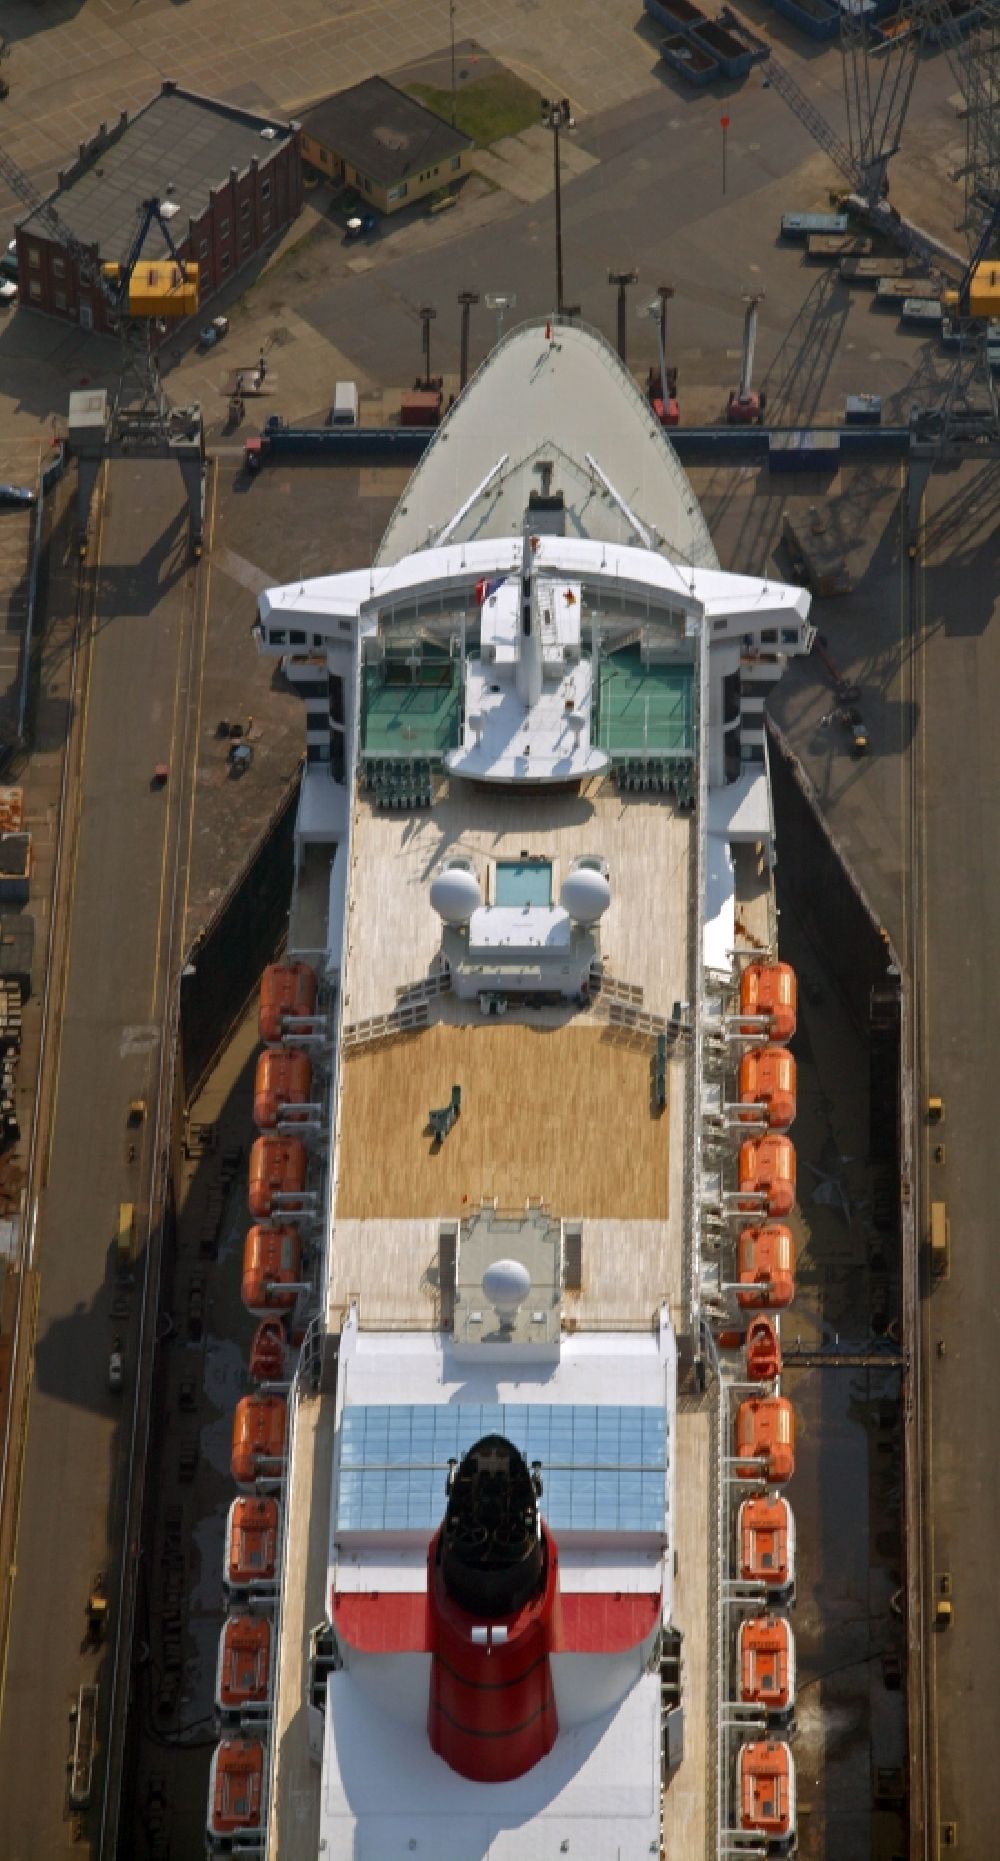 Hamburg from above - Passenger ship and luxury liner Queen Mary 2 on the Elbe 17 dry dock of Blohm and Voss in Hamburg company for maintenance and repairs. It is at 345 meters, the largest passenger ship in the world. The German shipyard Blohm and Voss is a subsidiary of ThyssenKrupp AG